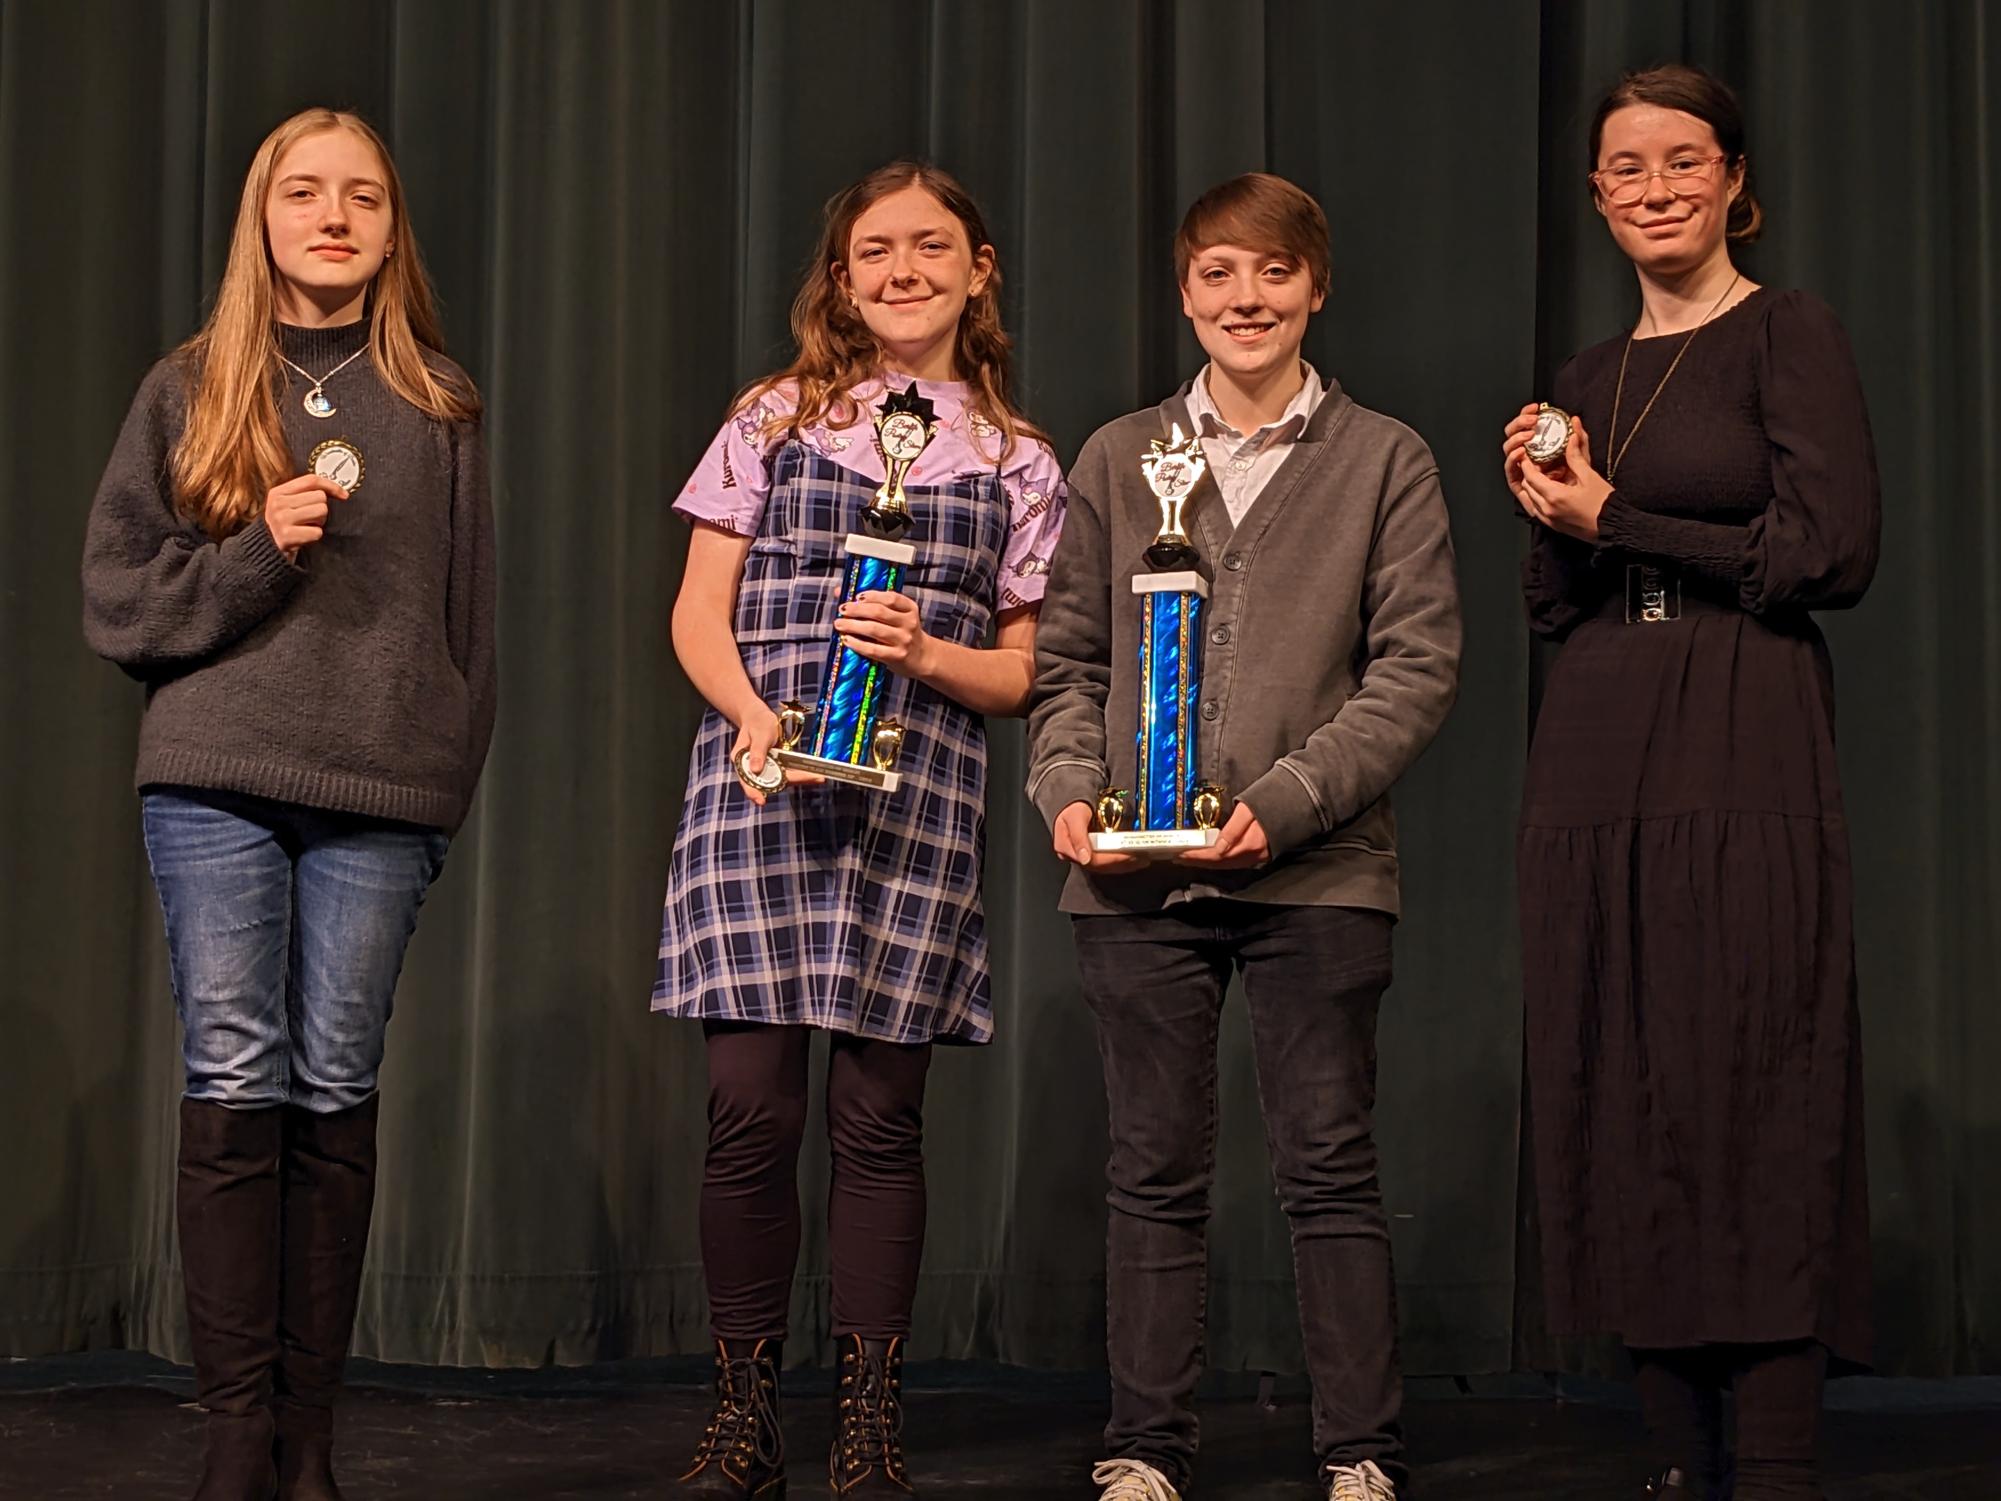 The four student contestants hold their awards. Junior Andrew Rozek placed first with his two poems entitled “Fastidious” and “Beetles”. Junior Arianna McCormick placed second with her two poems “Mold” and “Leaves”. (L-R: sophomore Emelia Beulen, junior Arianna McCormick, junior Andrew Rozek, senior Violet Daubner.) 